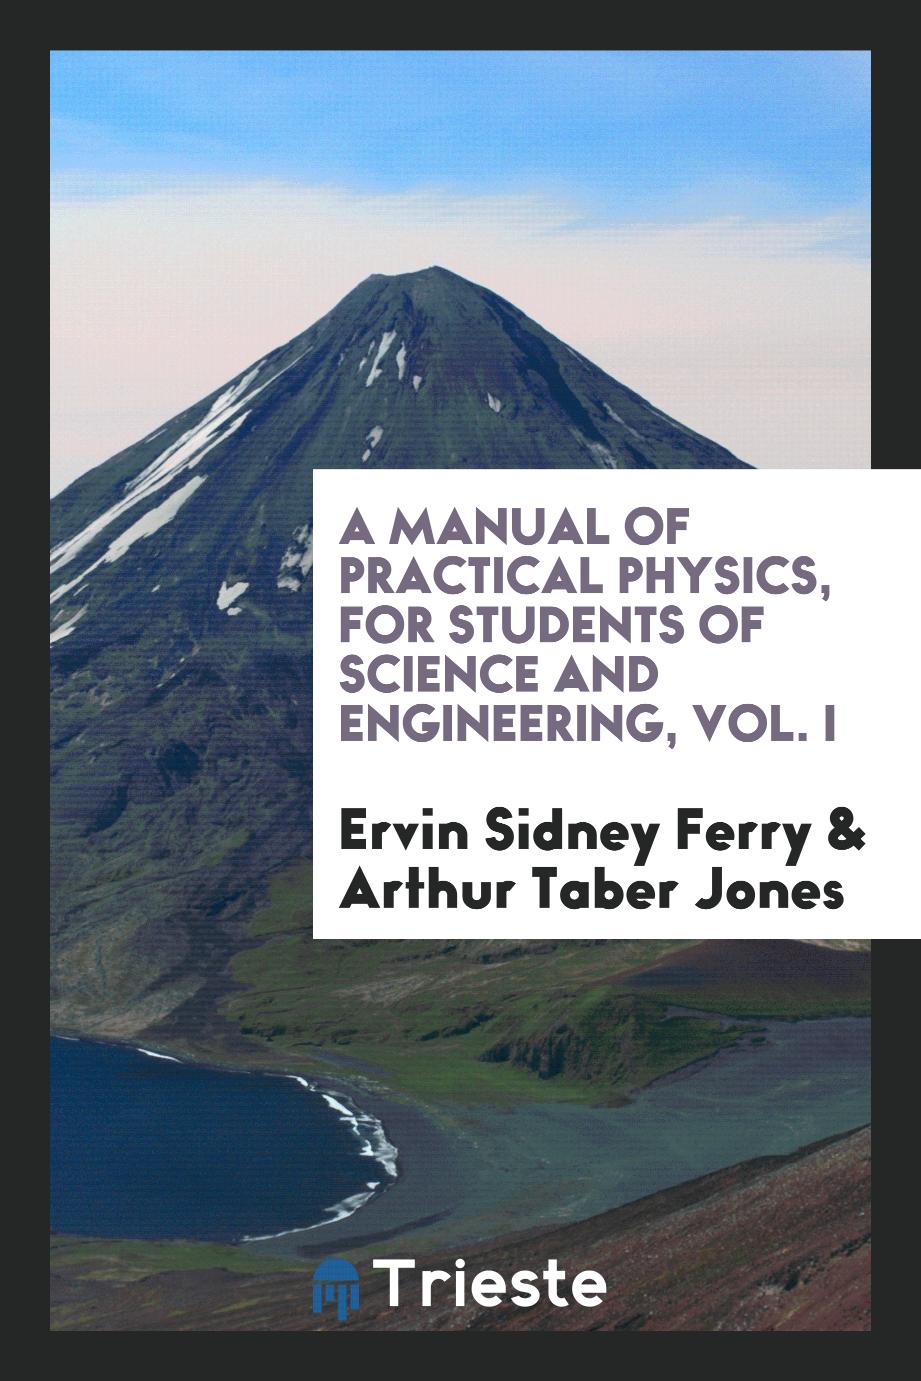 A Manual of Practical Physics, for Students of Science and Engineering, Vol. I